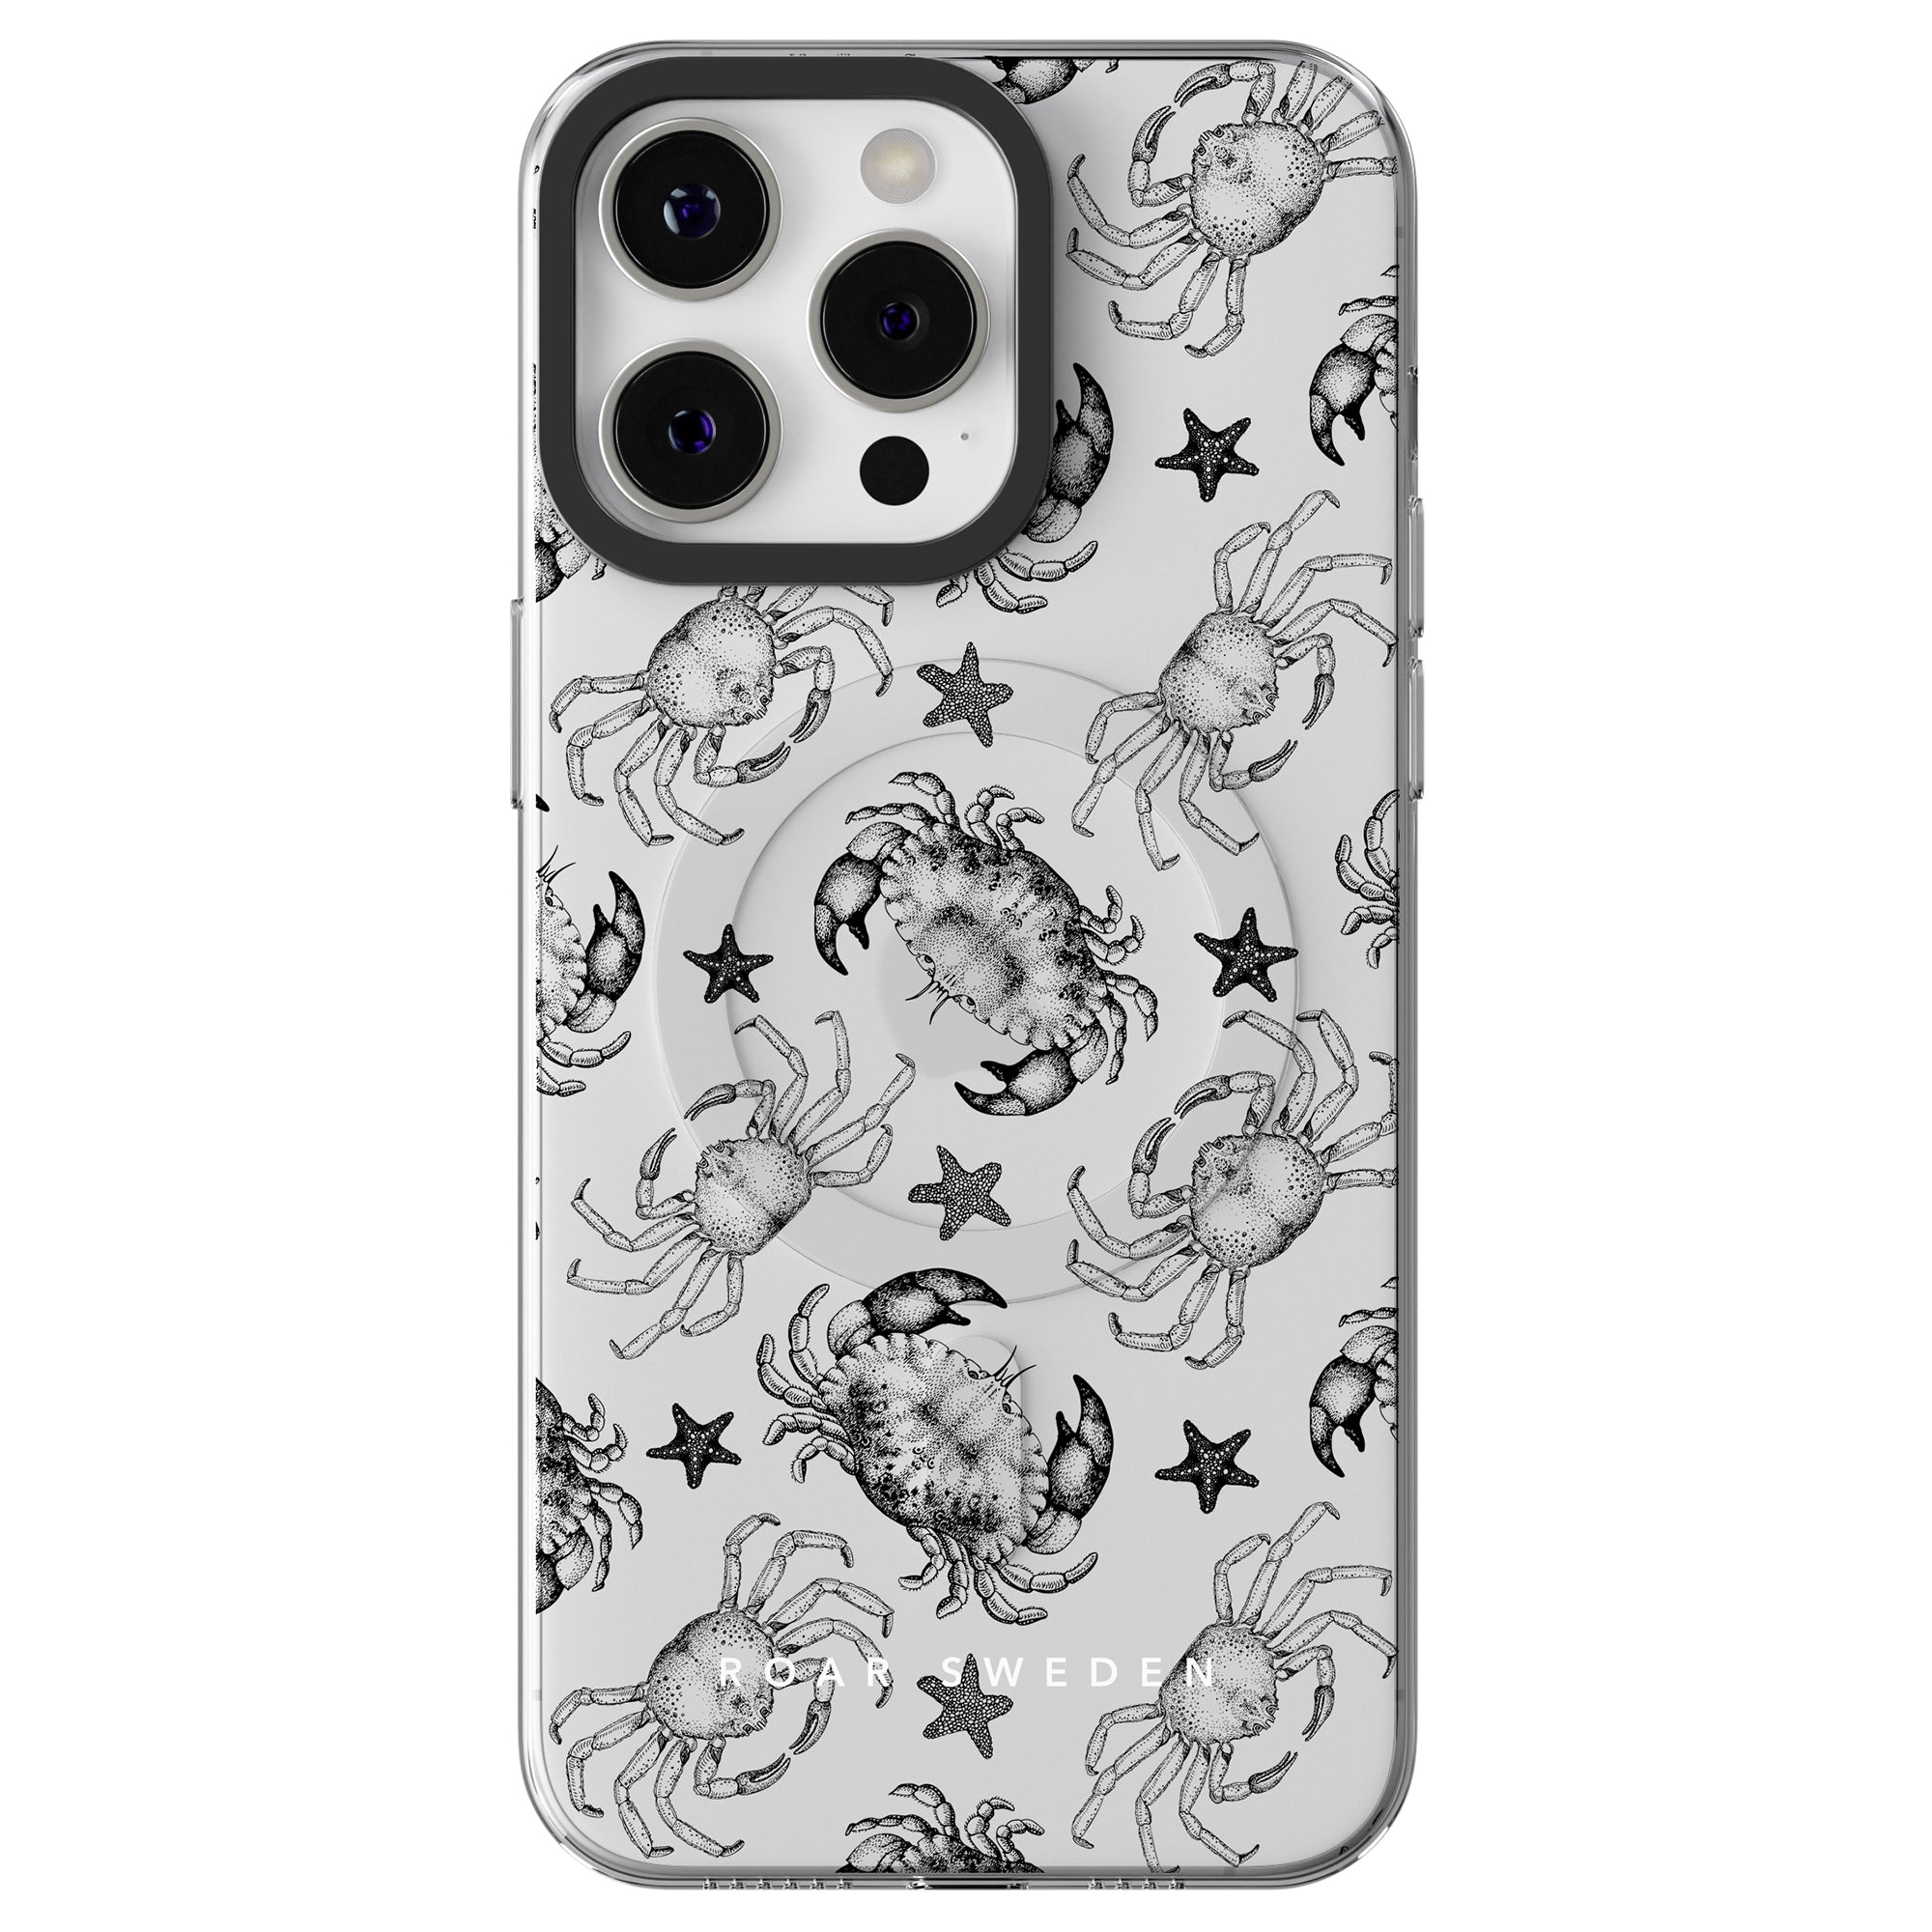 Introducing the Ocean Collection: a smartphone accessory featuring a Black Crab - MagSafe adorned with a striking black and white pattern of crabs and starfish.